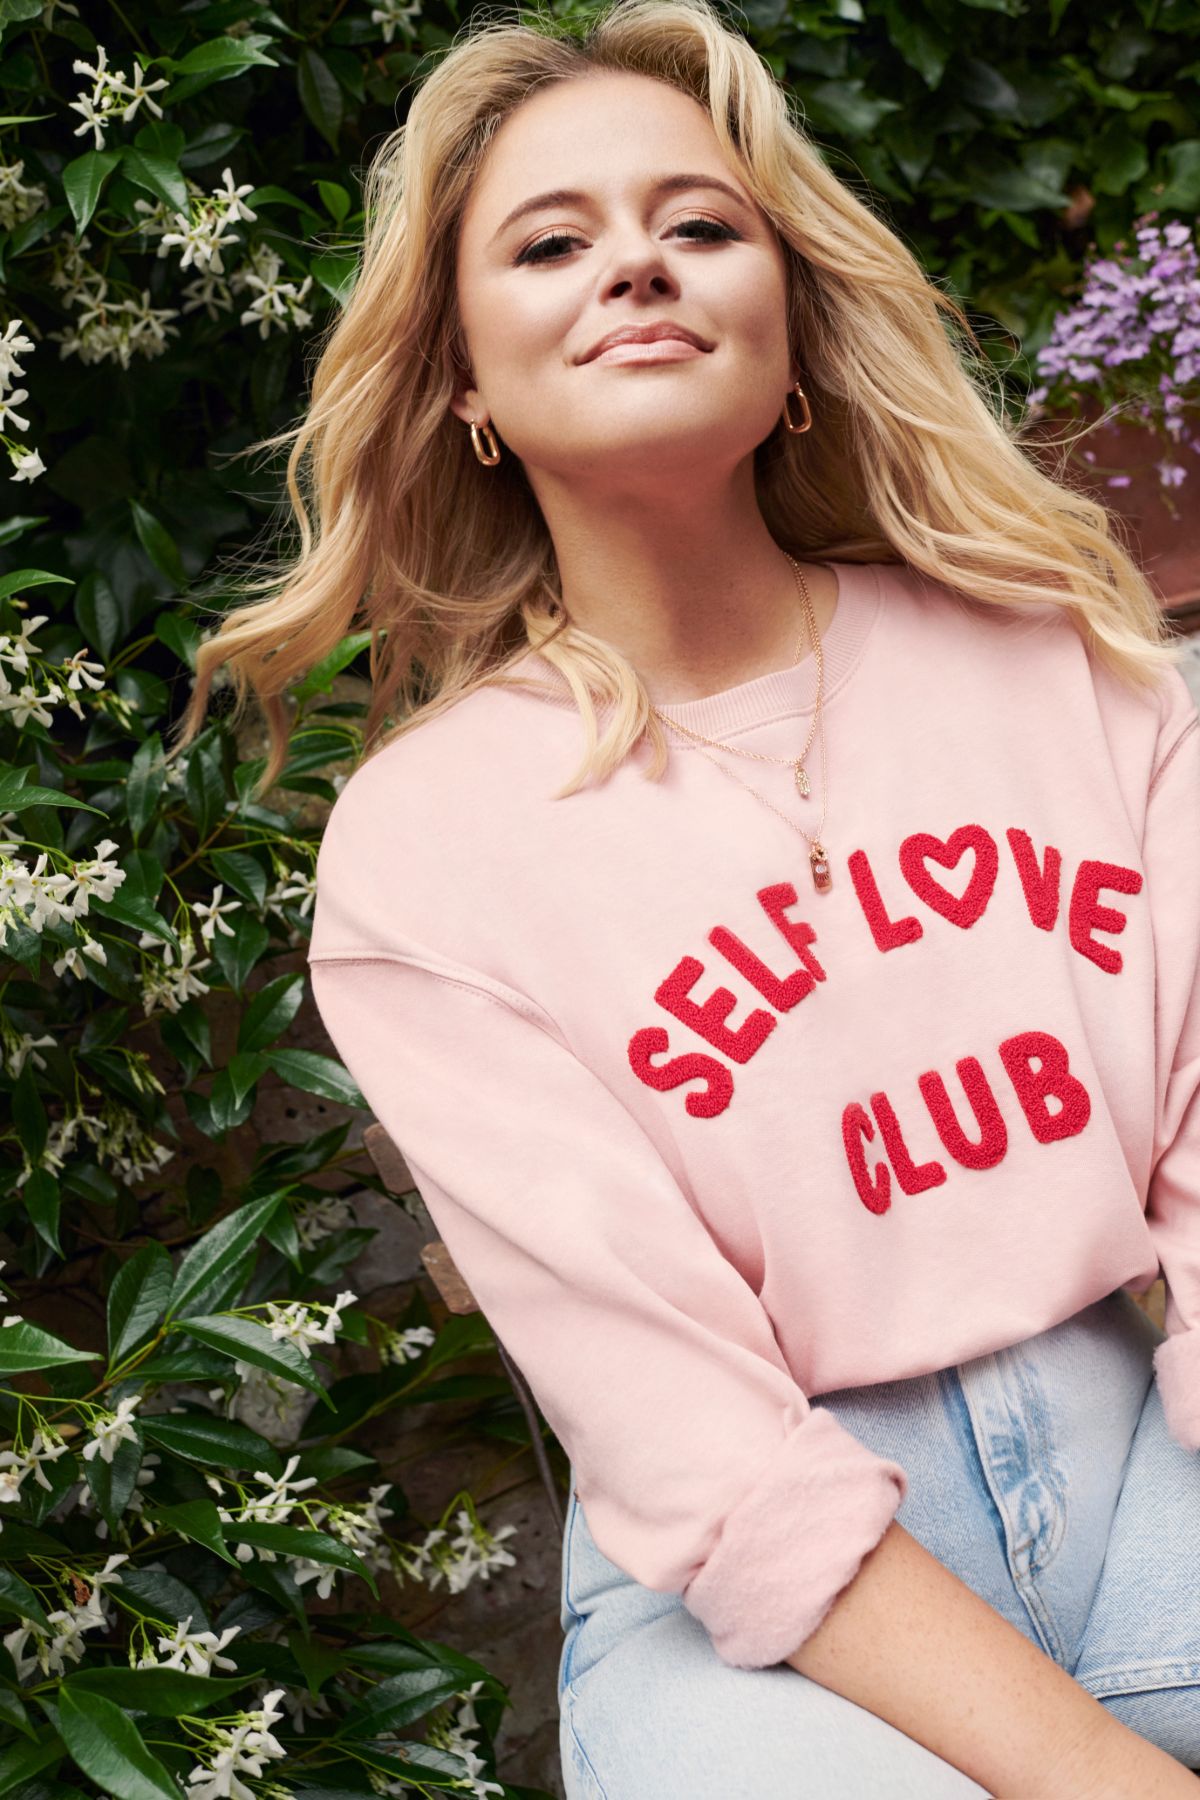 Emily Atack in New Look's Autumn/Winter Talent Campaign 2021